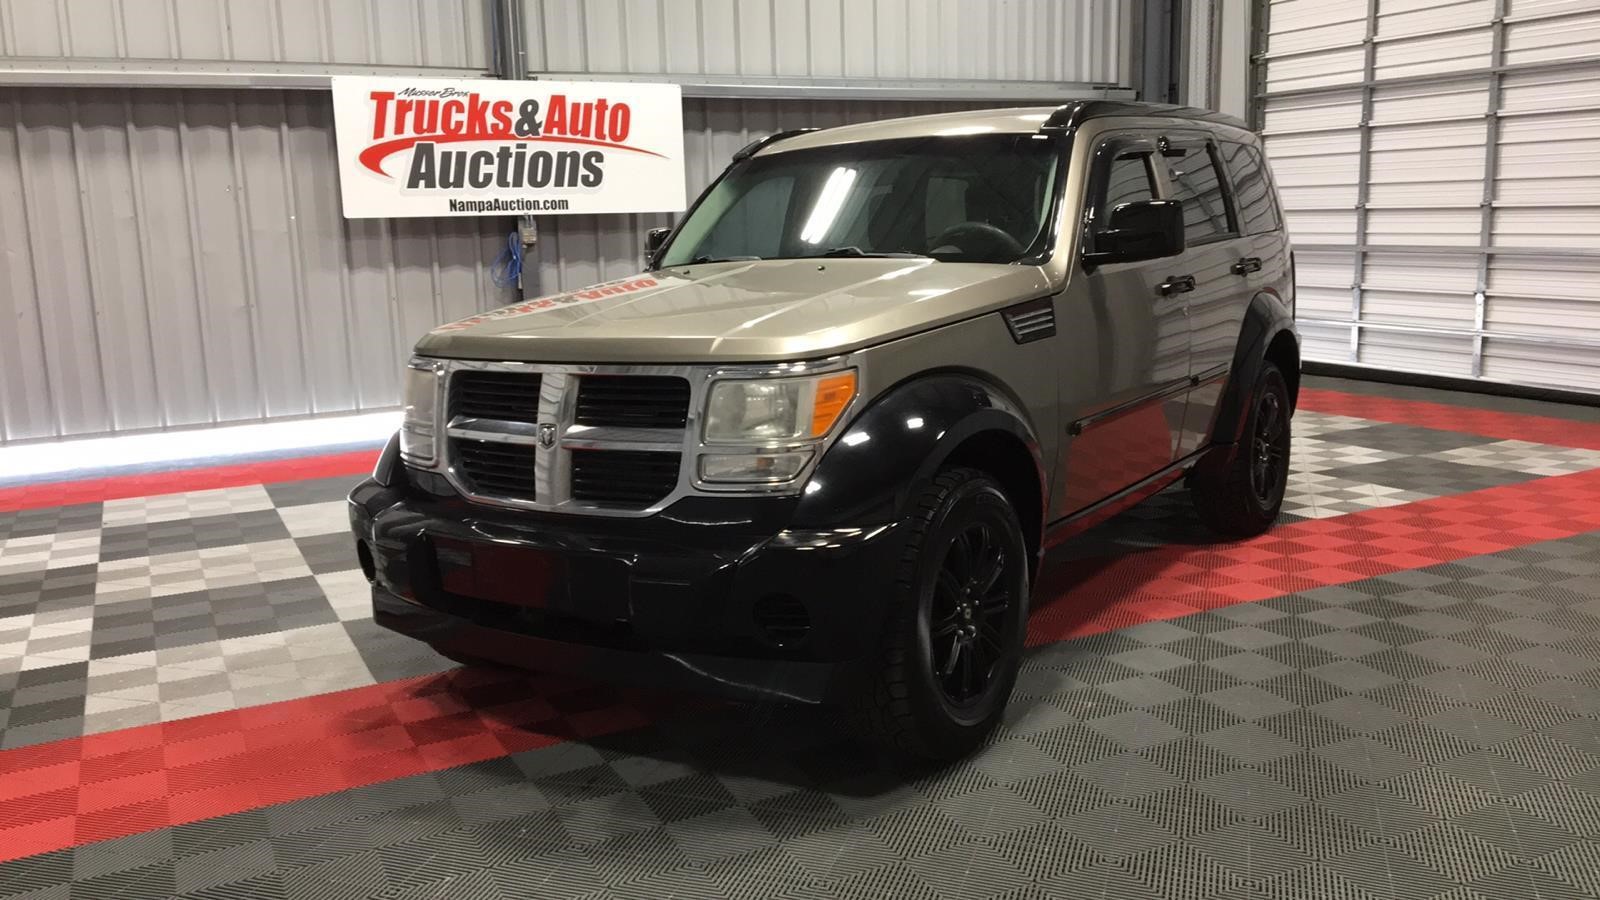 092817 Trucks & Auto Auctions Online Only